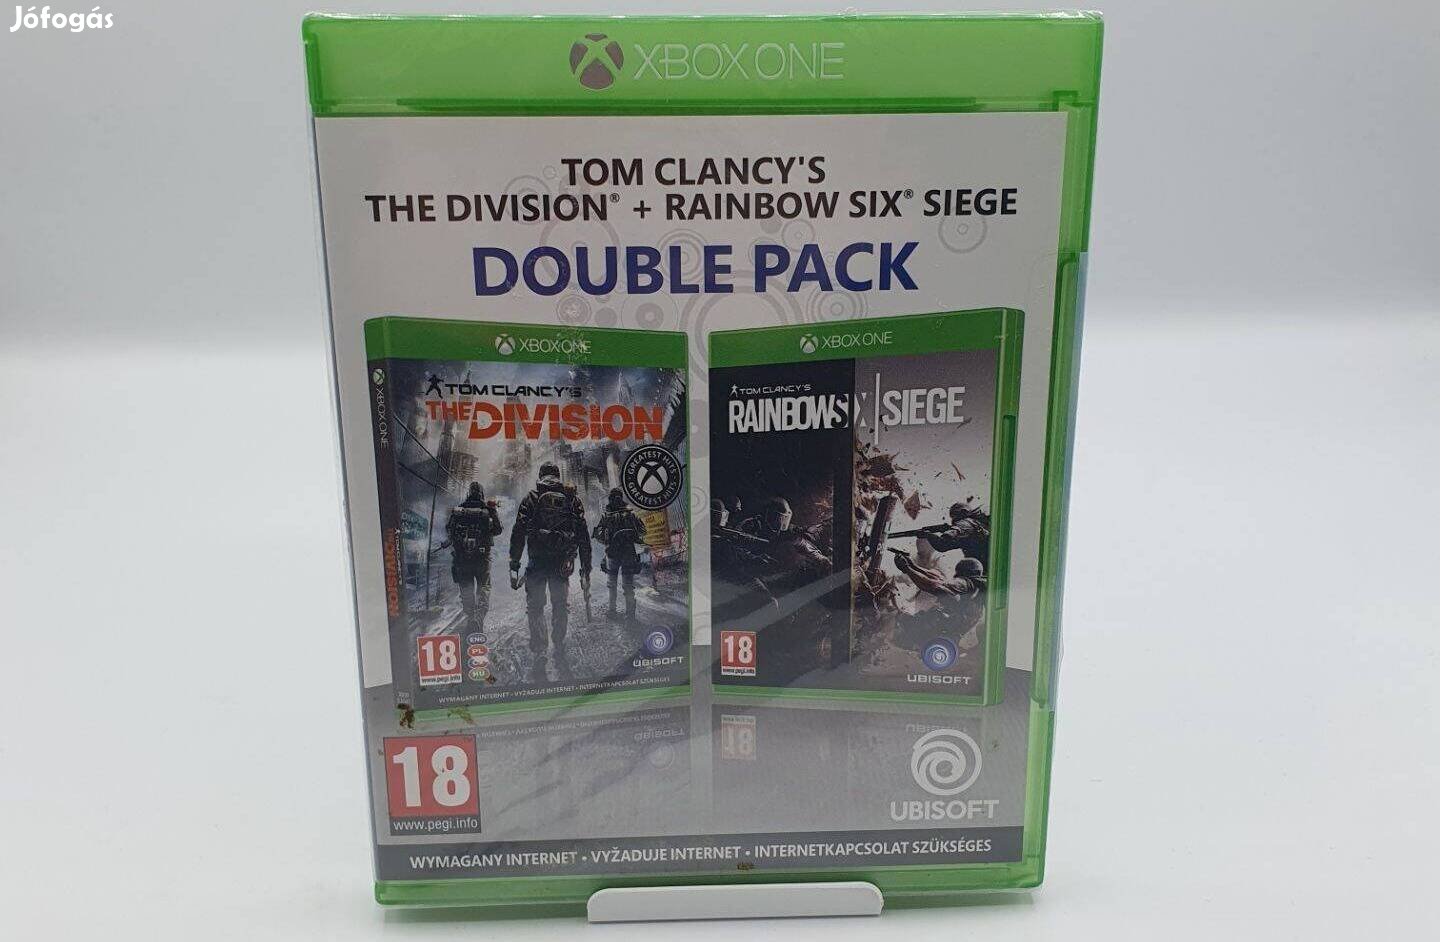 Tom Clancy's The Division + Rainbow Six Siege Double Pack - Xbox One